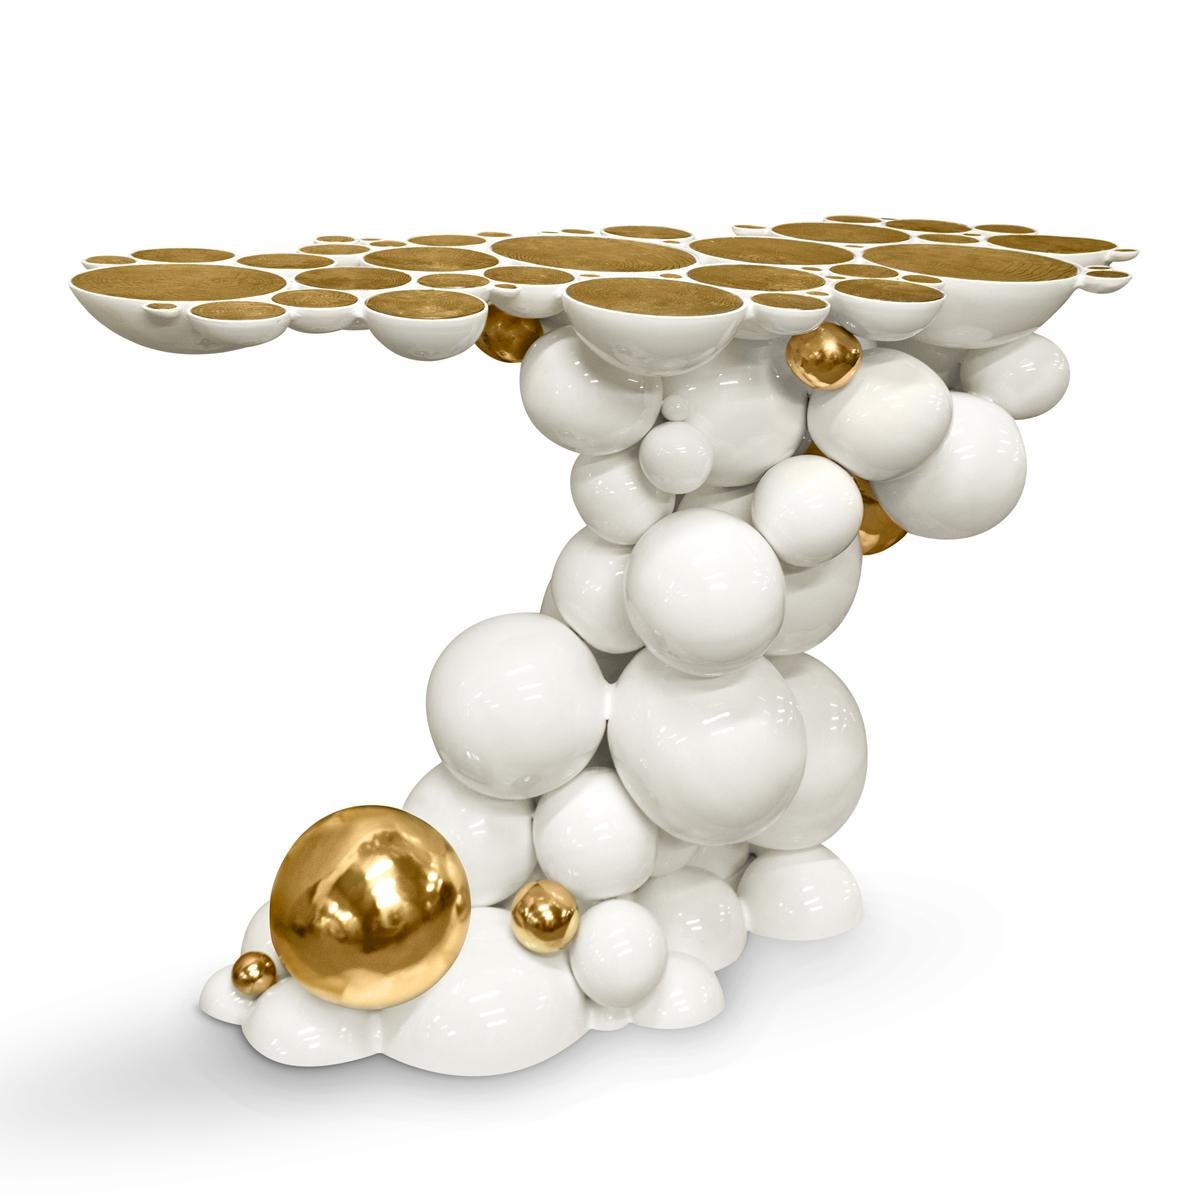 Console table spheres composed by metallic spheres
and semi spheres joined together. Aluminium white varnish
and gold finish.
Also available in Black finish.